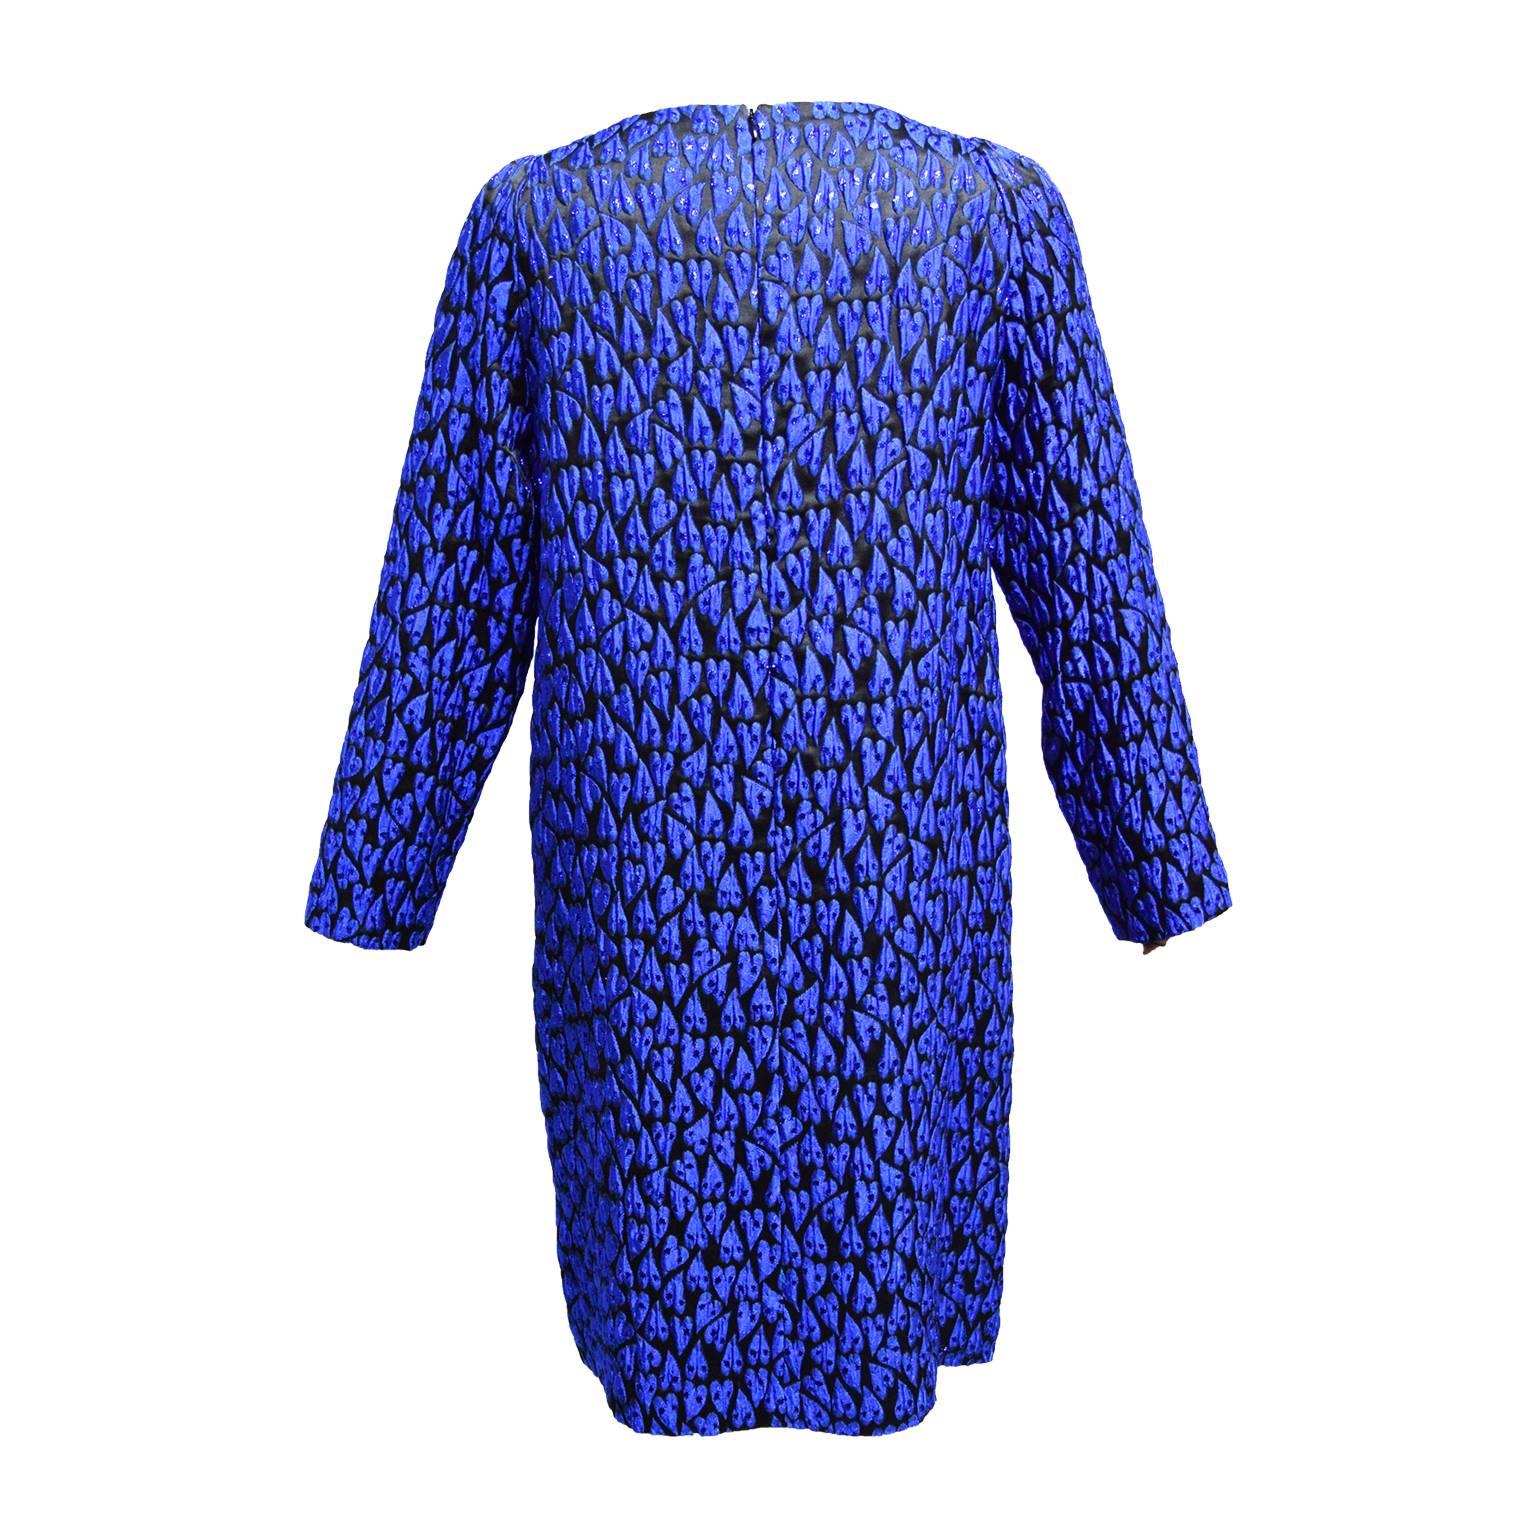 This Mauro Grifoni shift dress is made out of acrylic. The dress is printed with blue shaped hearts and gives off an iridescent sheen. The dress is long sleeved and has a back zipped closure. The dress is fully lined and has a scoop neckline. 